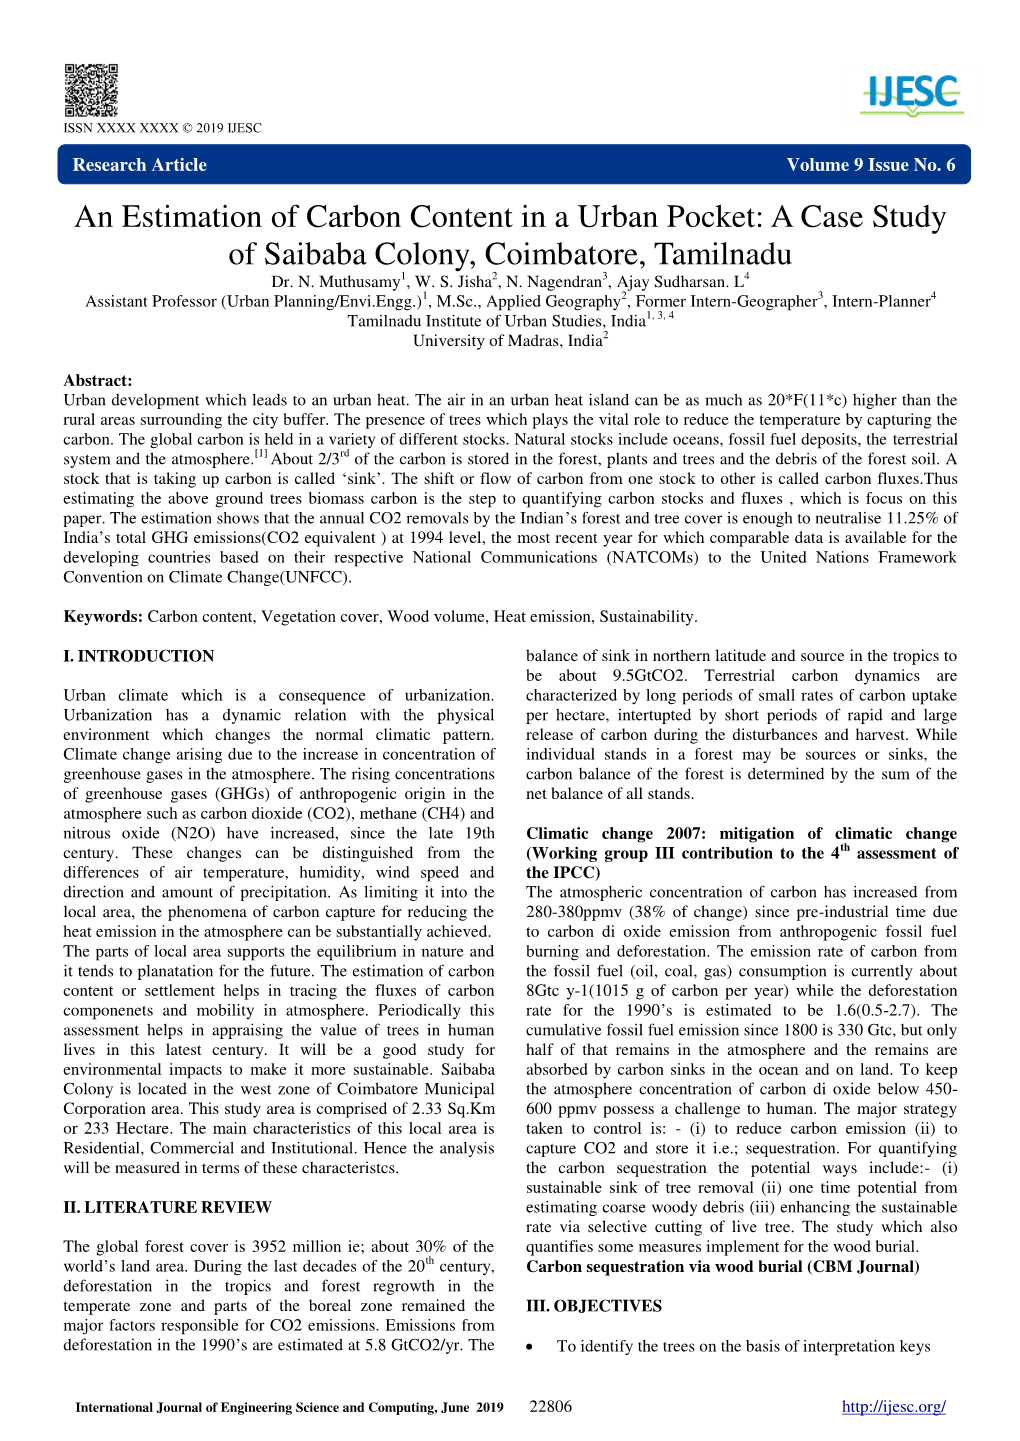 An Estimation of Carbon Content in a Urban Pocket: a Case Study of Saibaba Colony, Coimbatore, Tamilnadu Dr